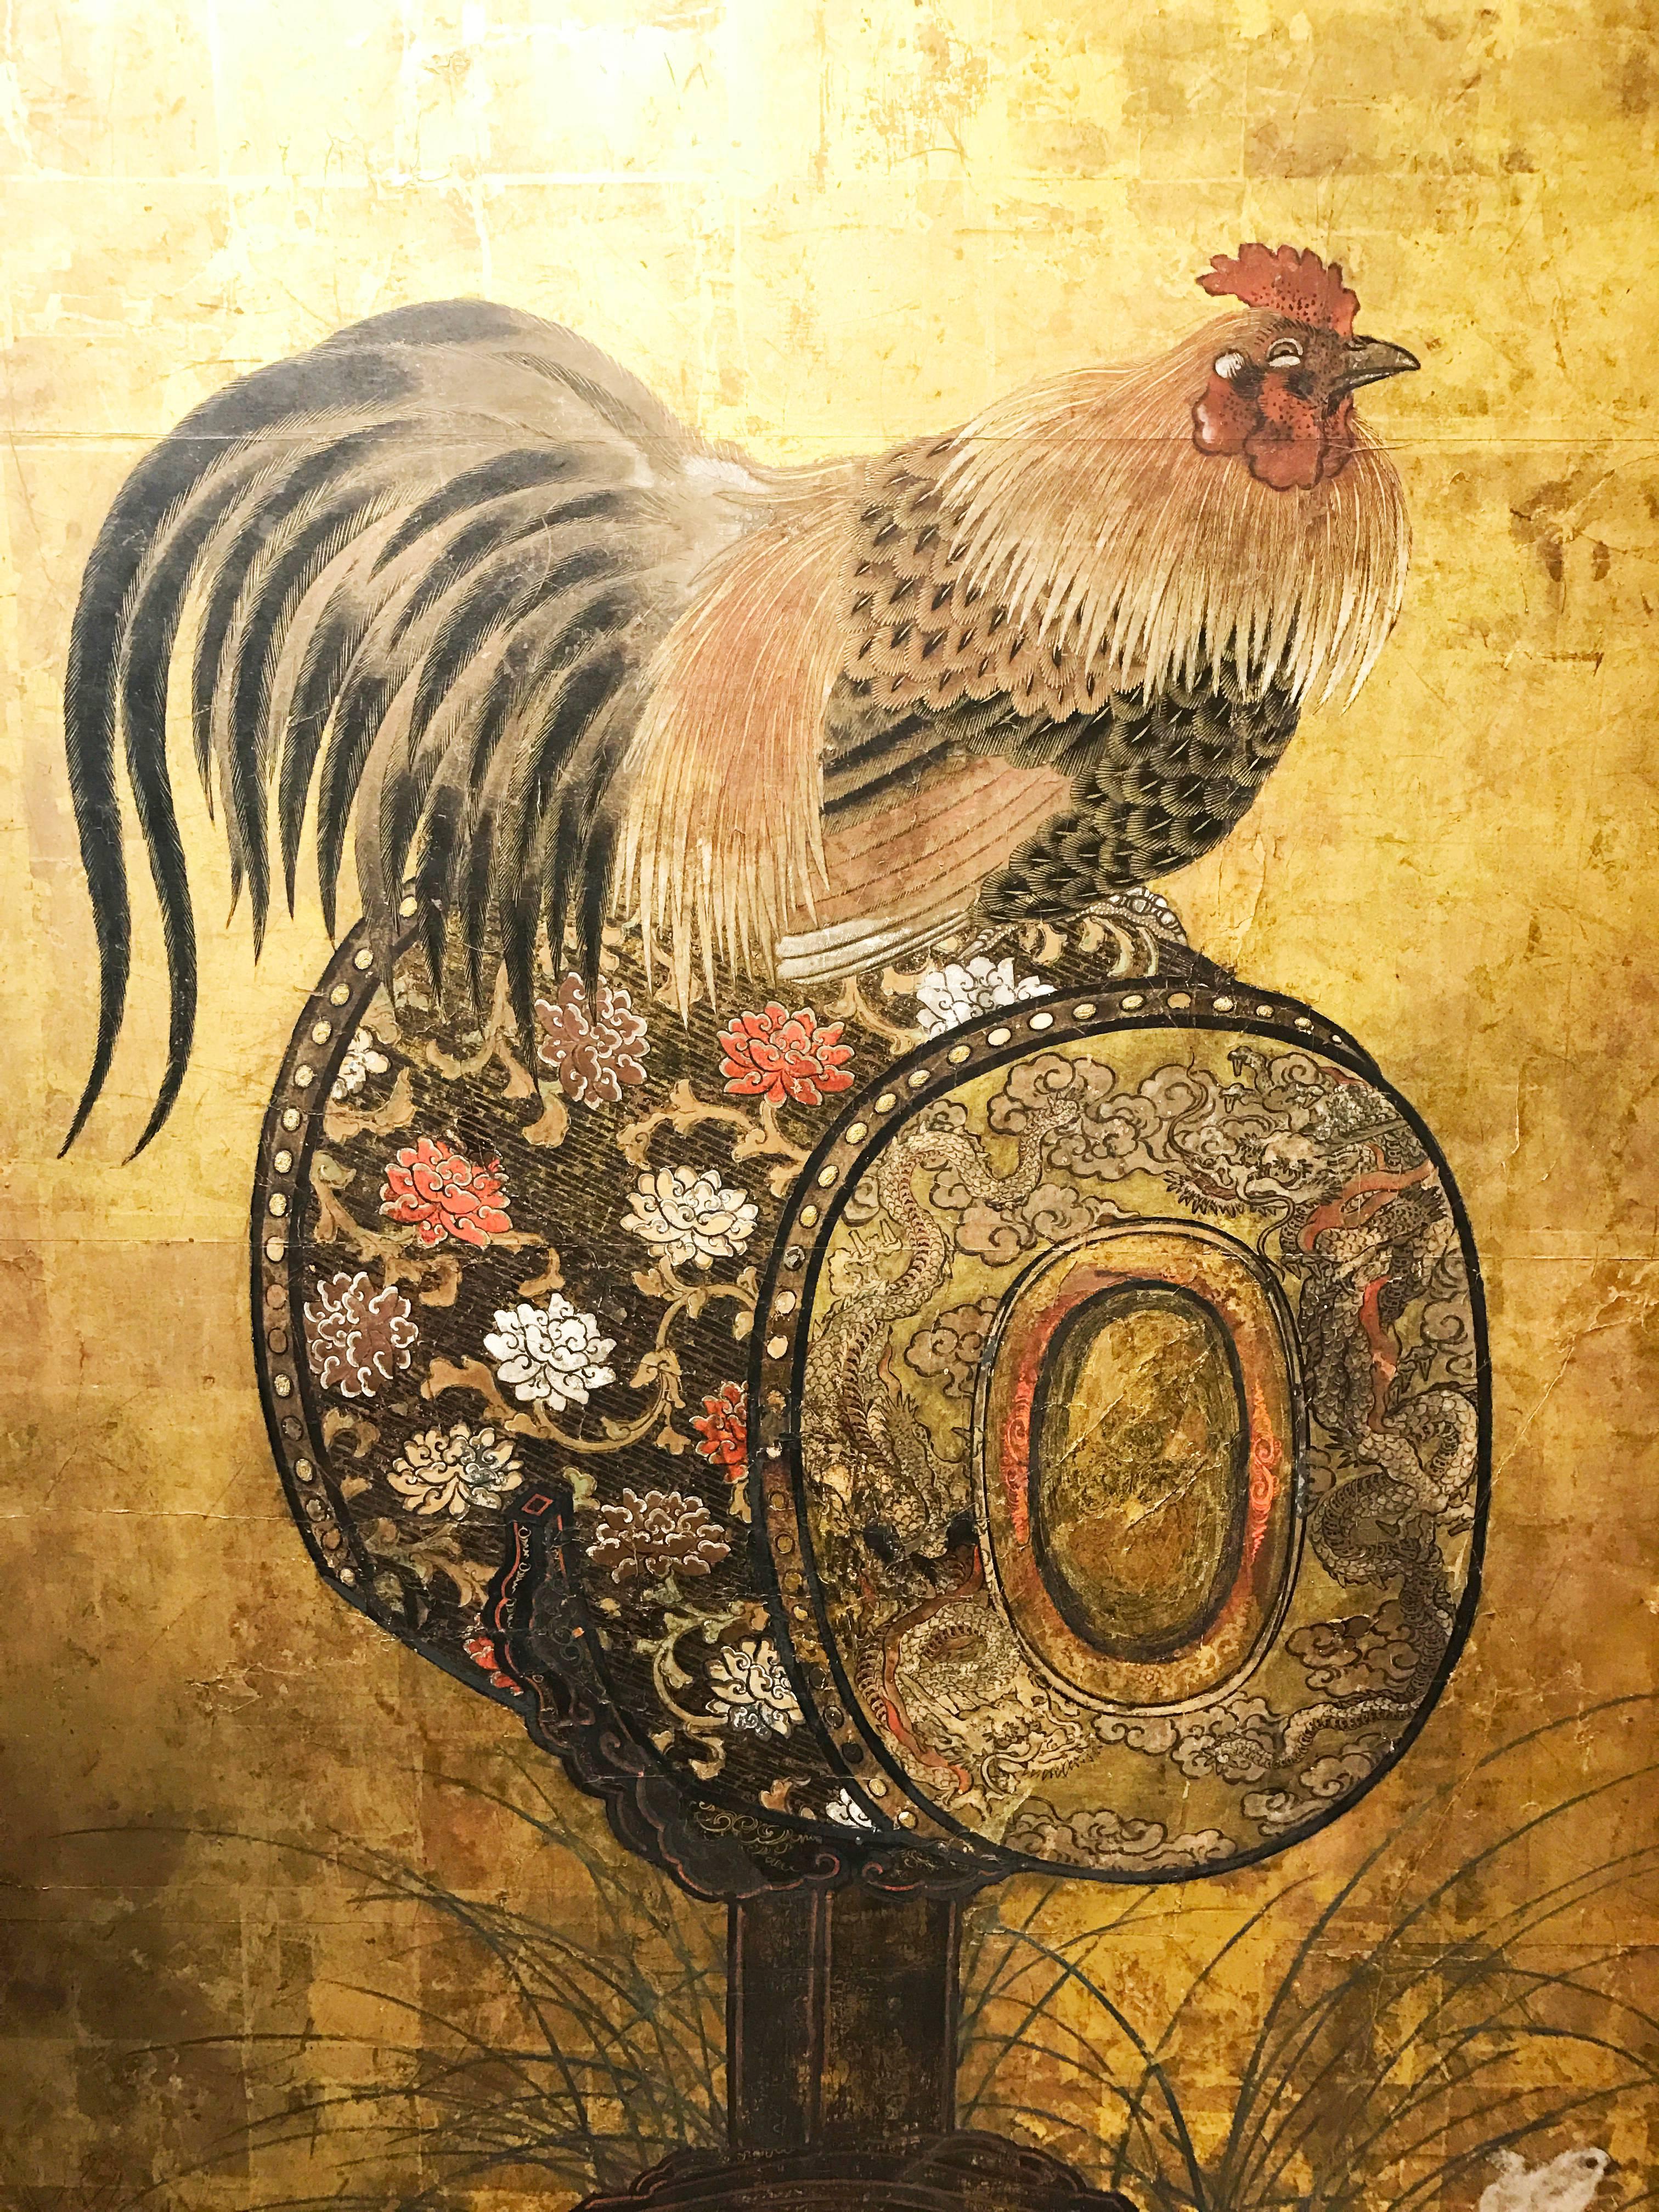 The striking design of cock on a drum originates from China. It is said that Emperor Yao had placed a drum in front of the gate at the court for people who struck it to offer a letter of remonstrance to the sovereign. The drum was not beaten, in